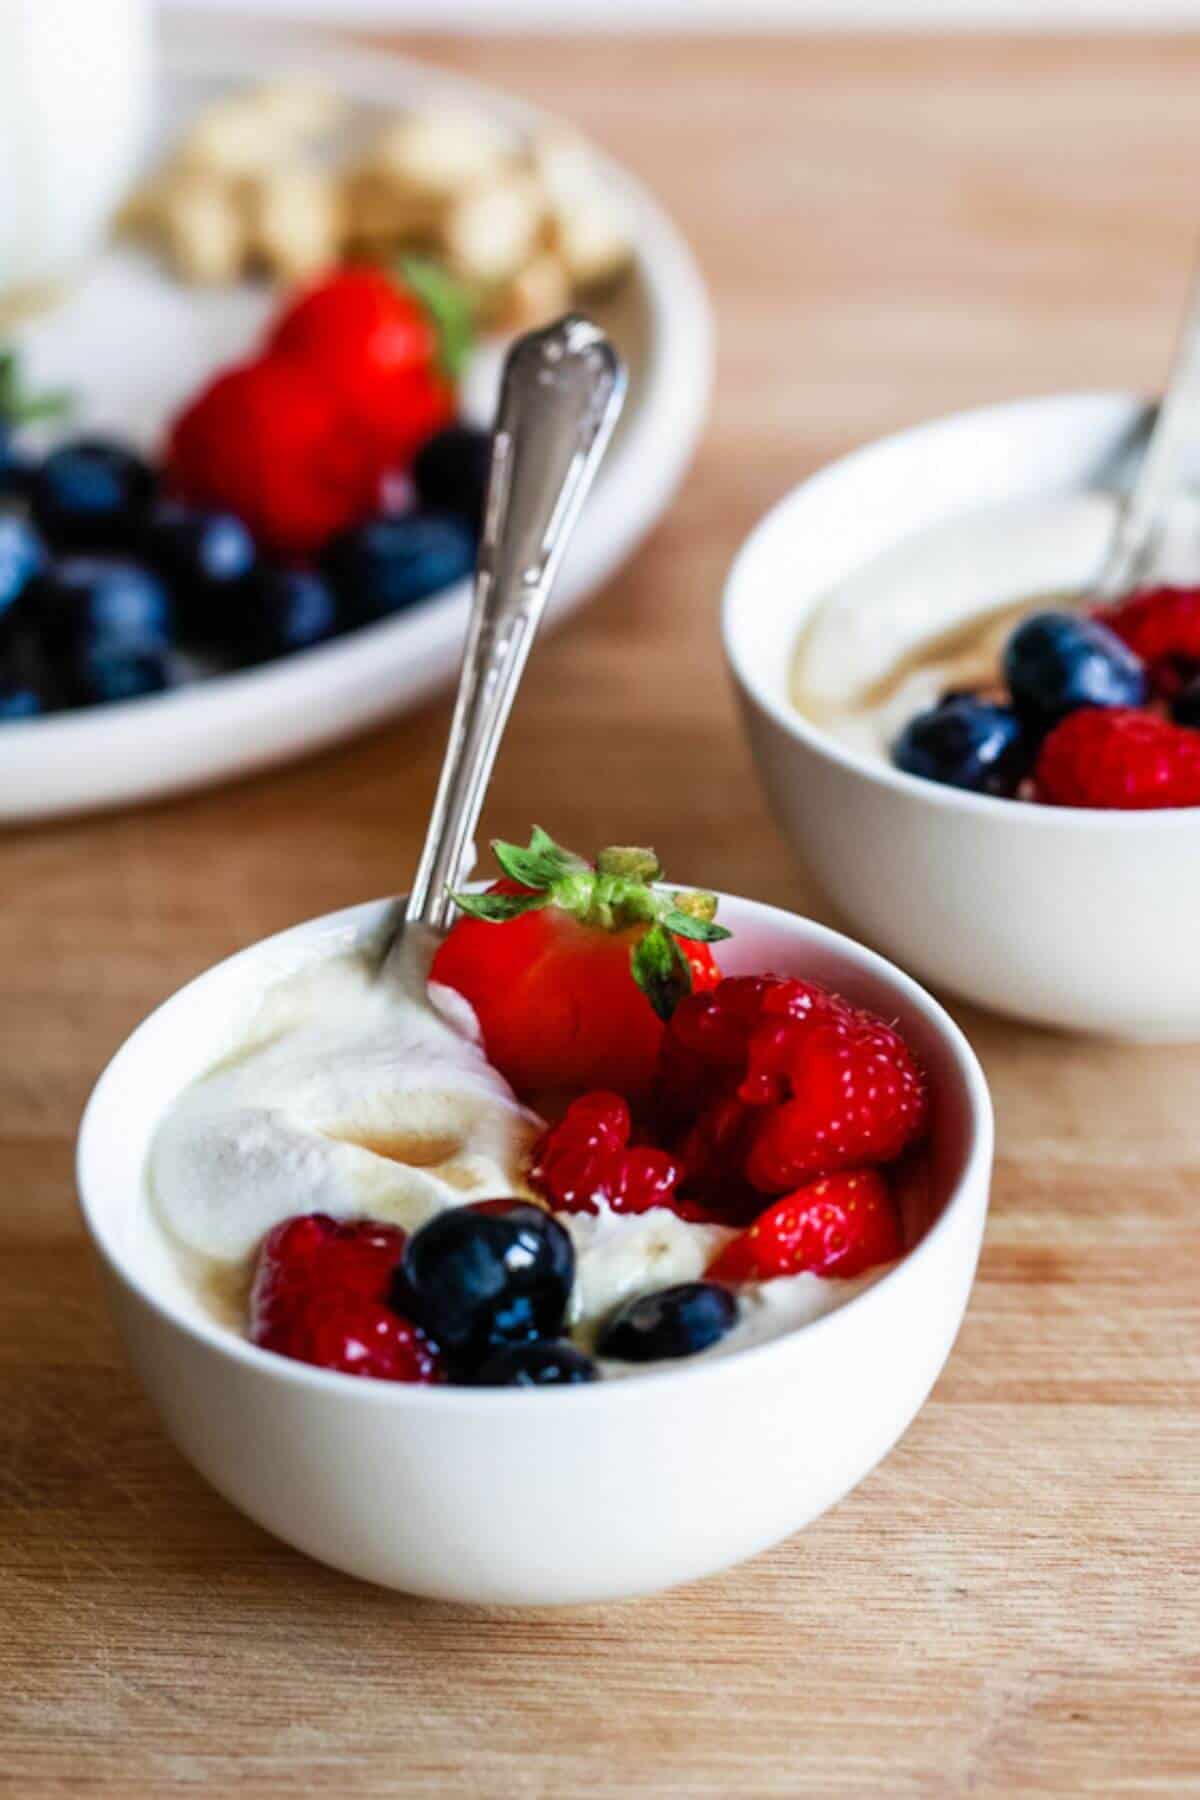 Two small bowls filled with yogurt and mixed berries.